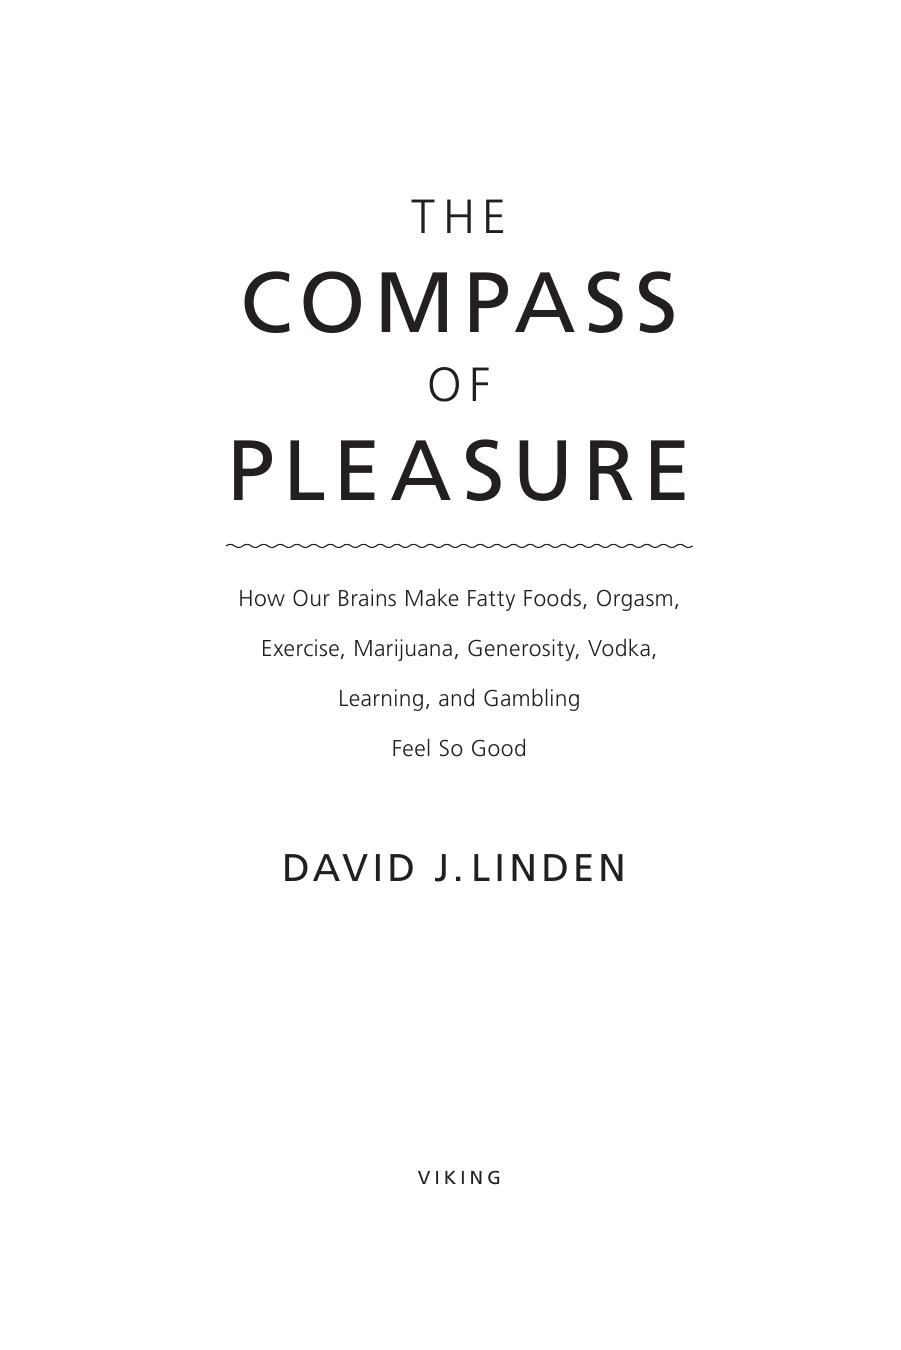 The Compass of Pleasure by David J. Linden